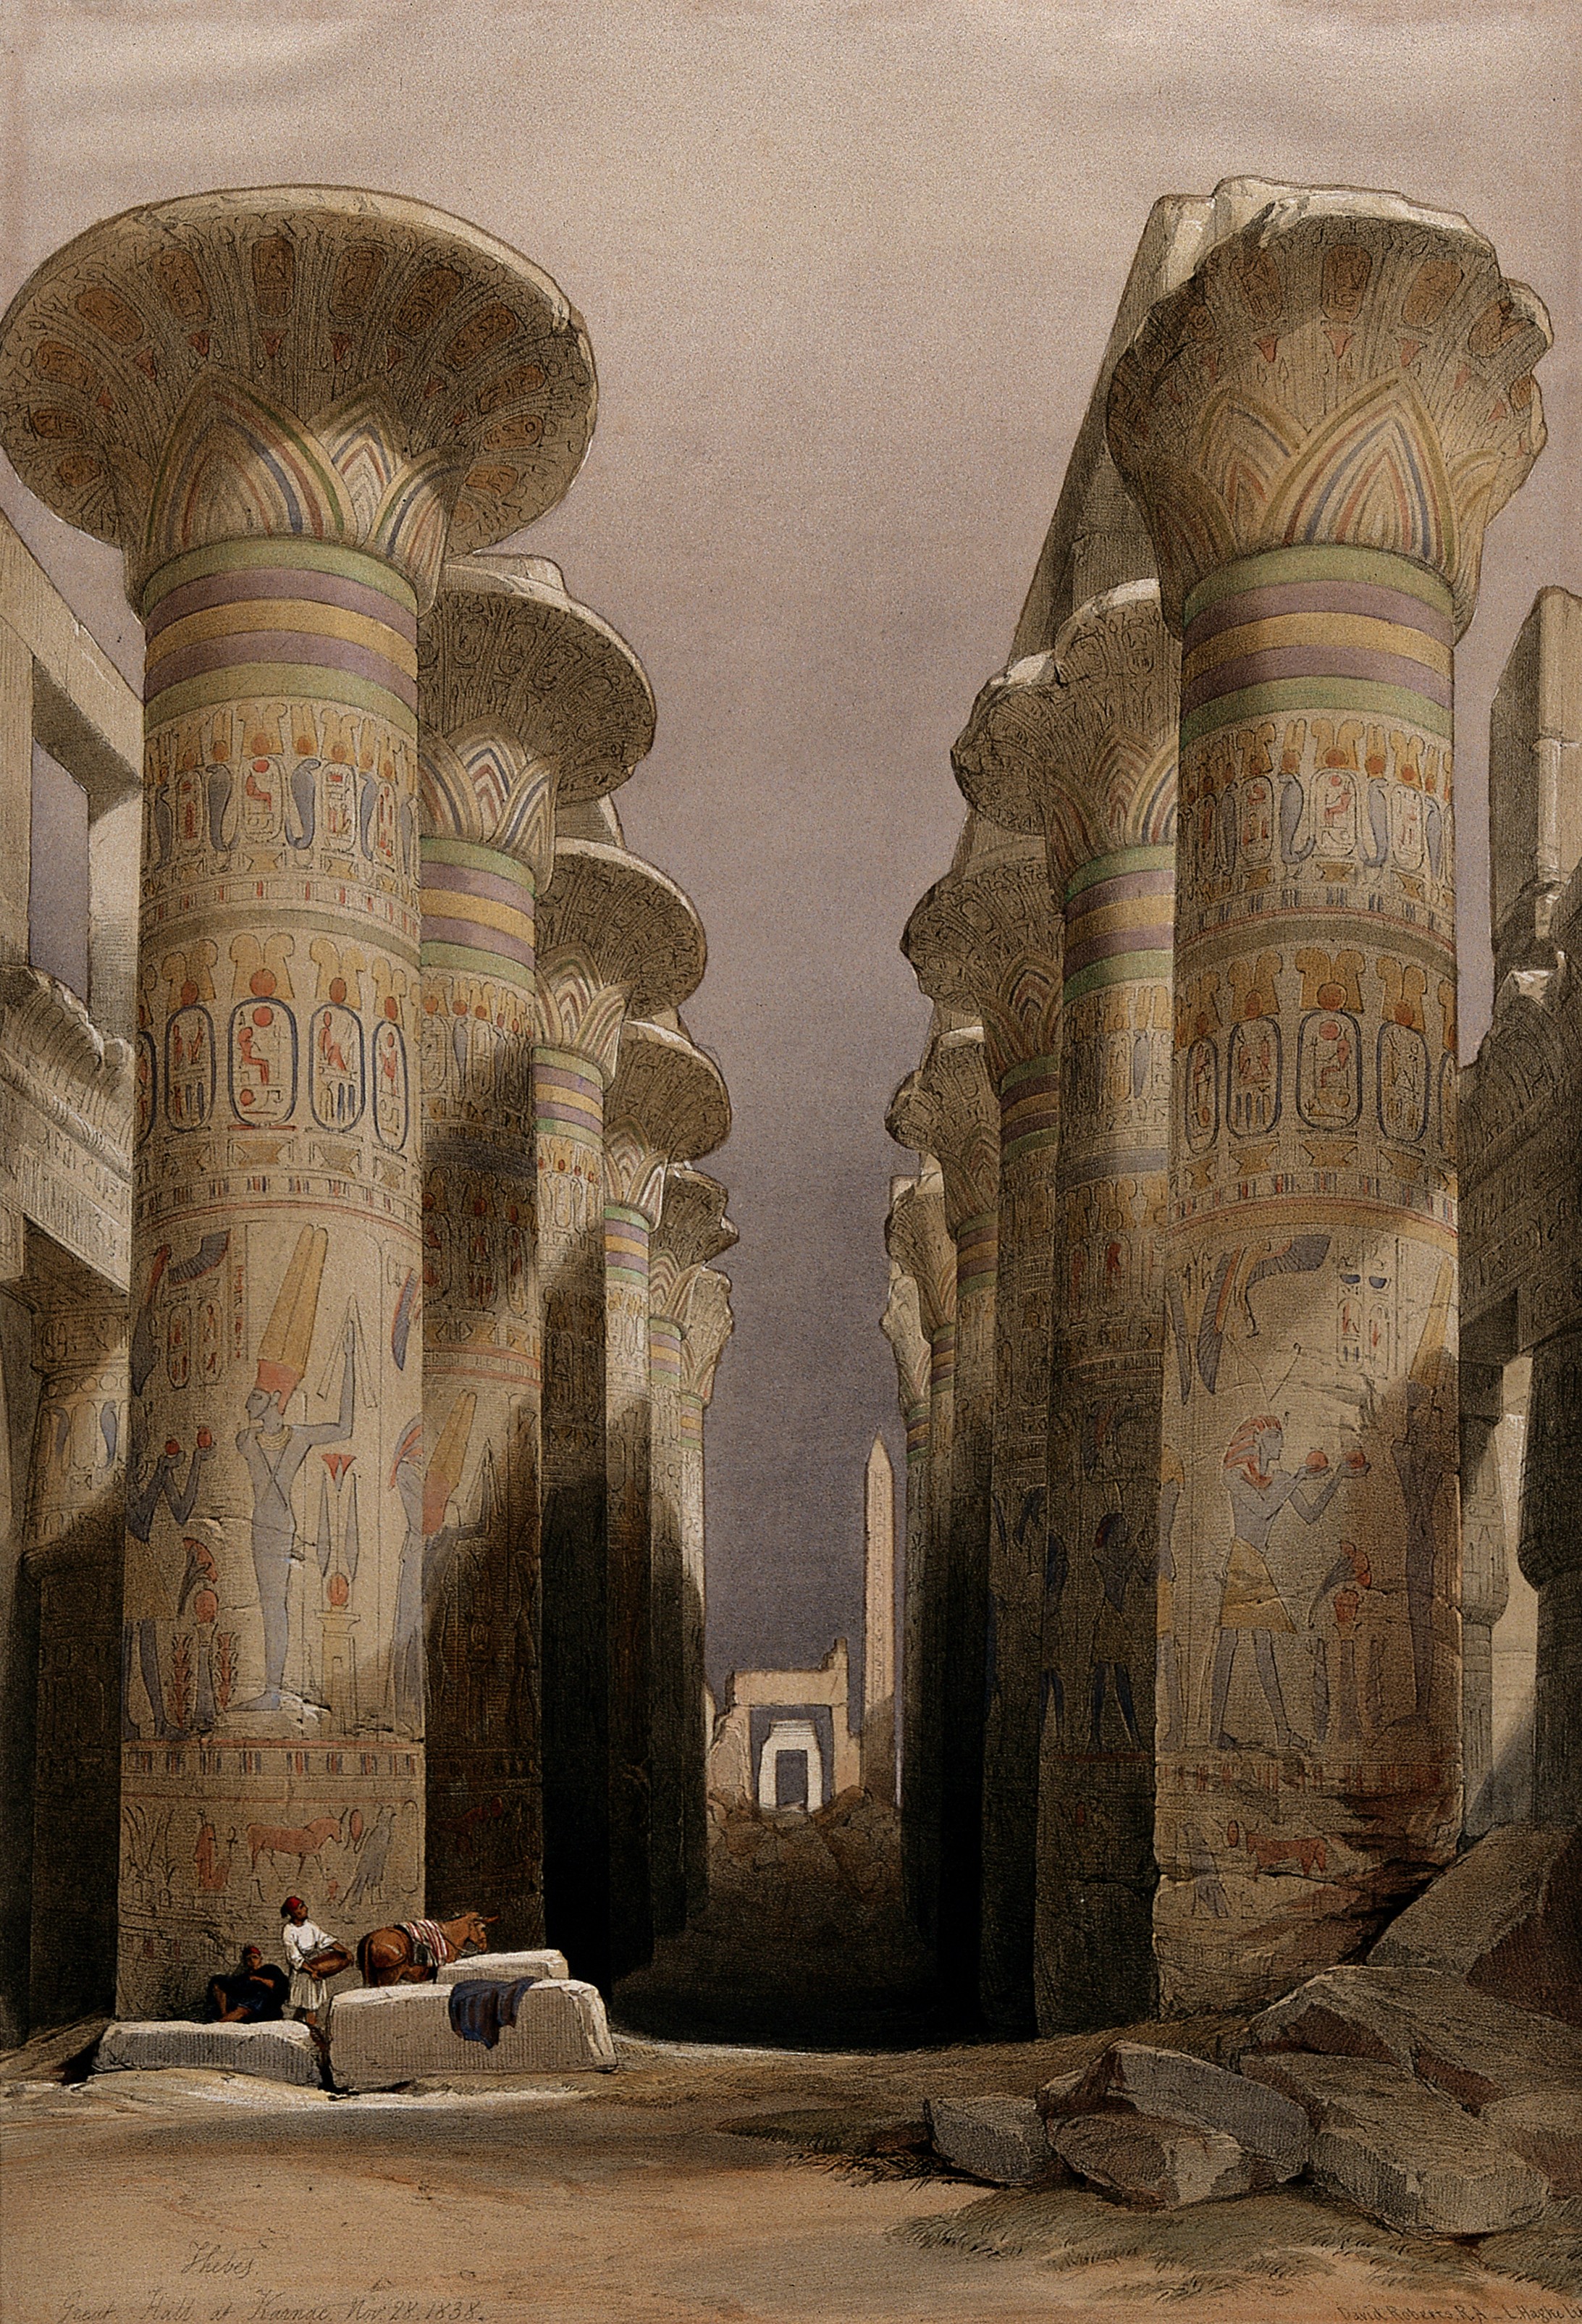 decorated_pillars_of_the_temple_at_karnac_thebes_egypt_co_wellcome_v0049316.jpg